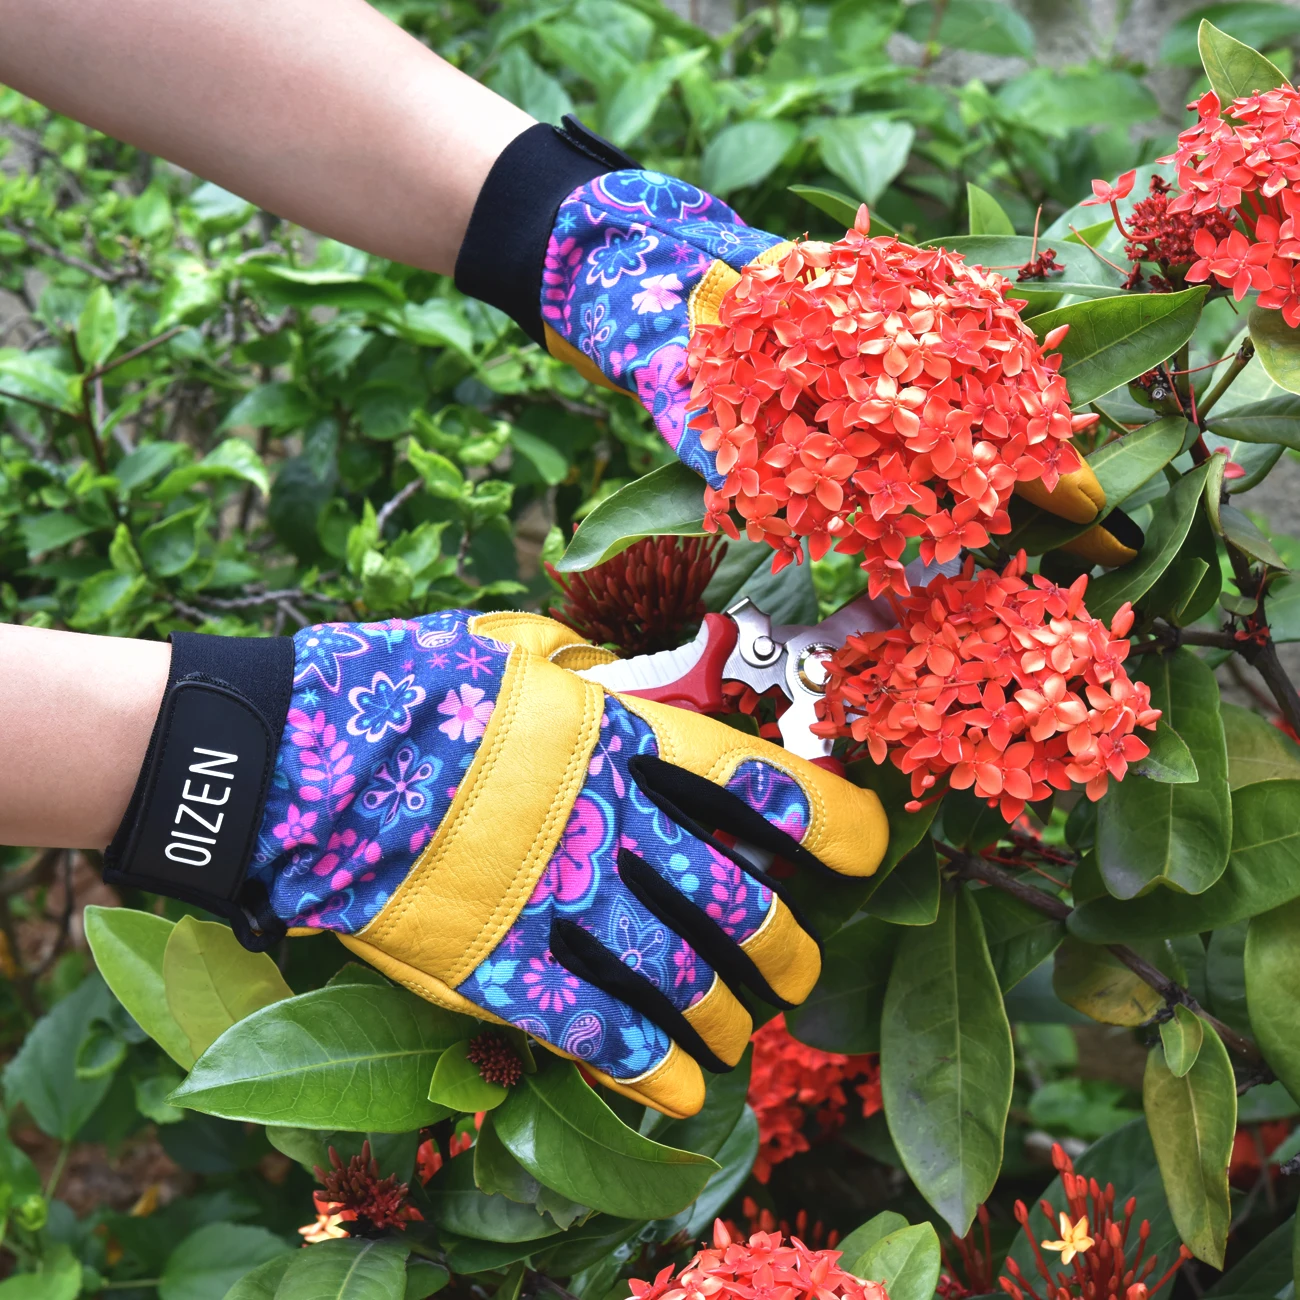 Cowhide Leather Gardening Rose Pruning Gloves Women Breathable  Wear-resistant Thorn Proof Working Gloves for Weeding Planting AliExpress